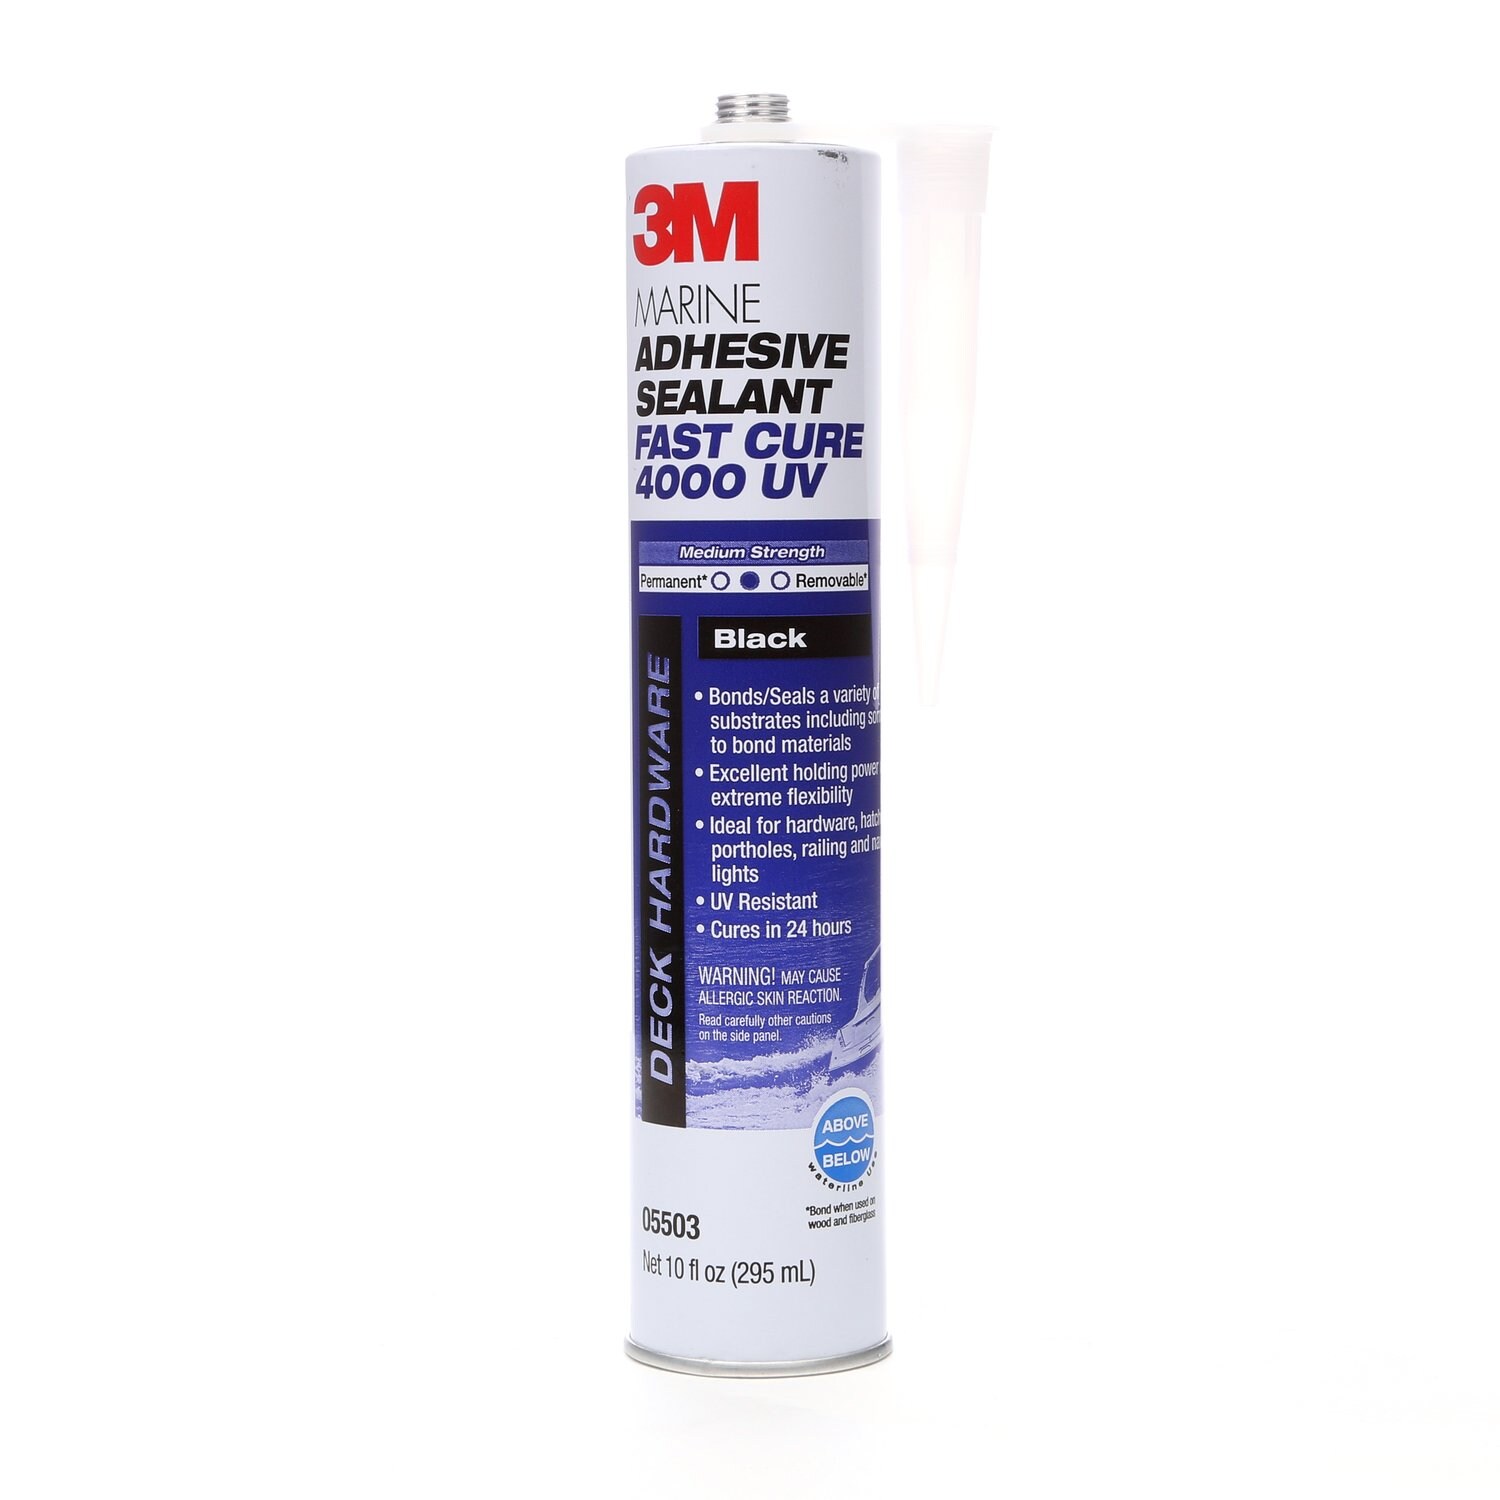 3M™ Novec™ Contact Cleaner, 312 g (11 oz), 6 Canisters/Case